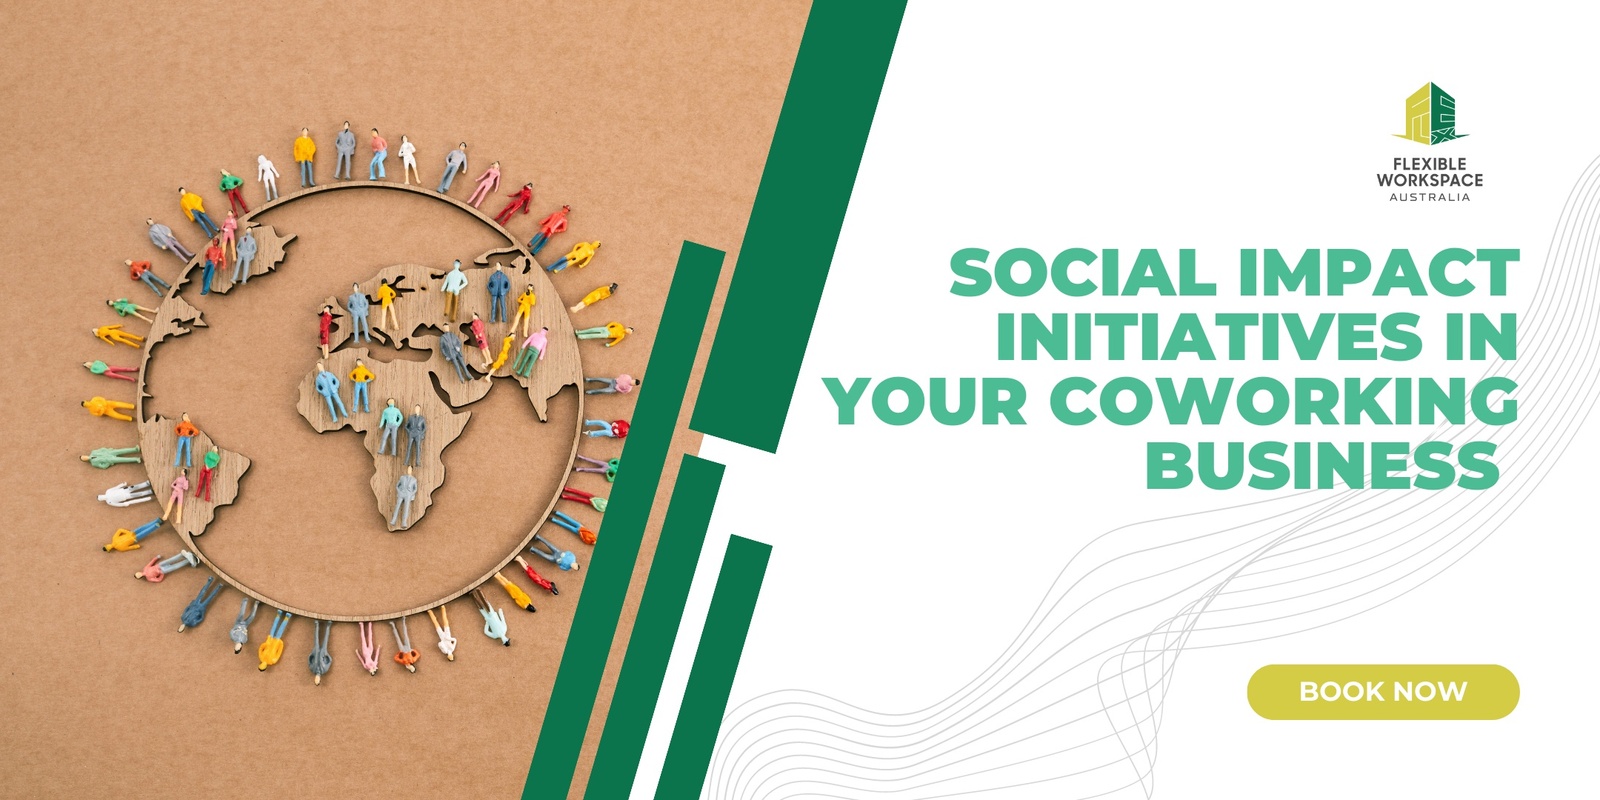 Banner image for How can social impact initiatives in your coworking business attract and retain customers, engage your team, grow your business - and enable positive change?